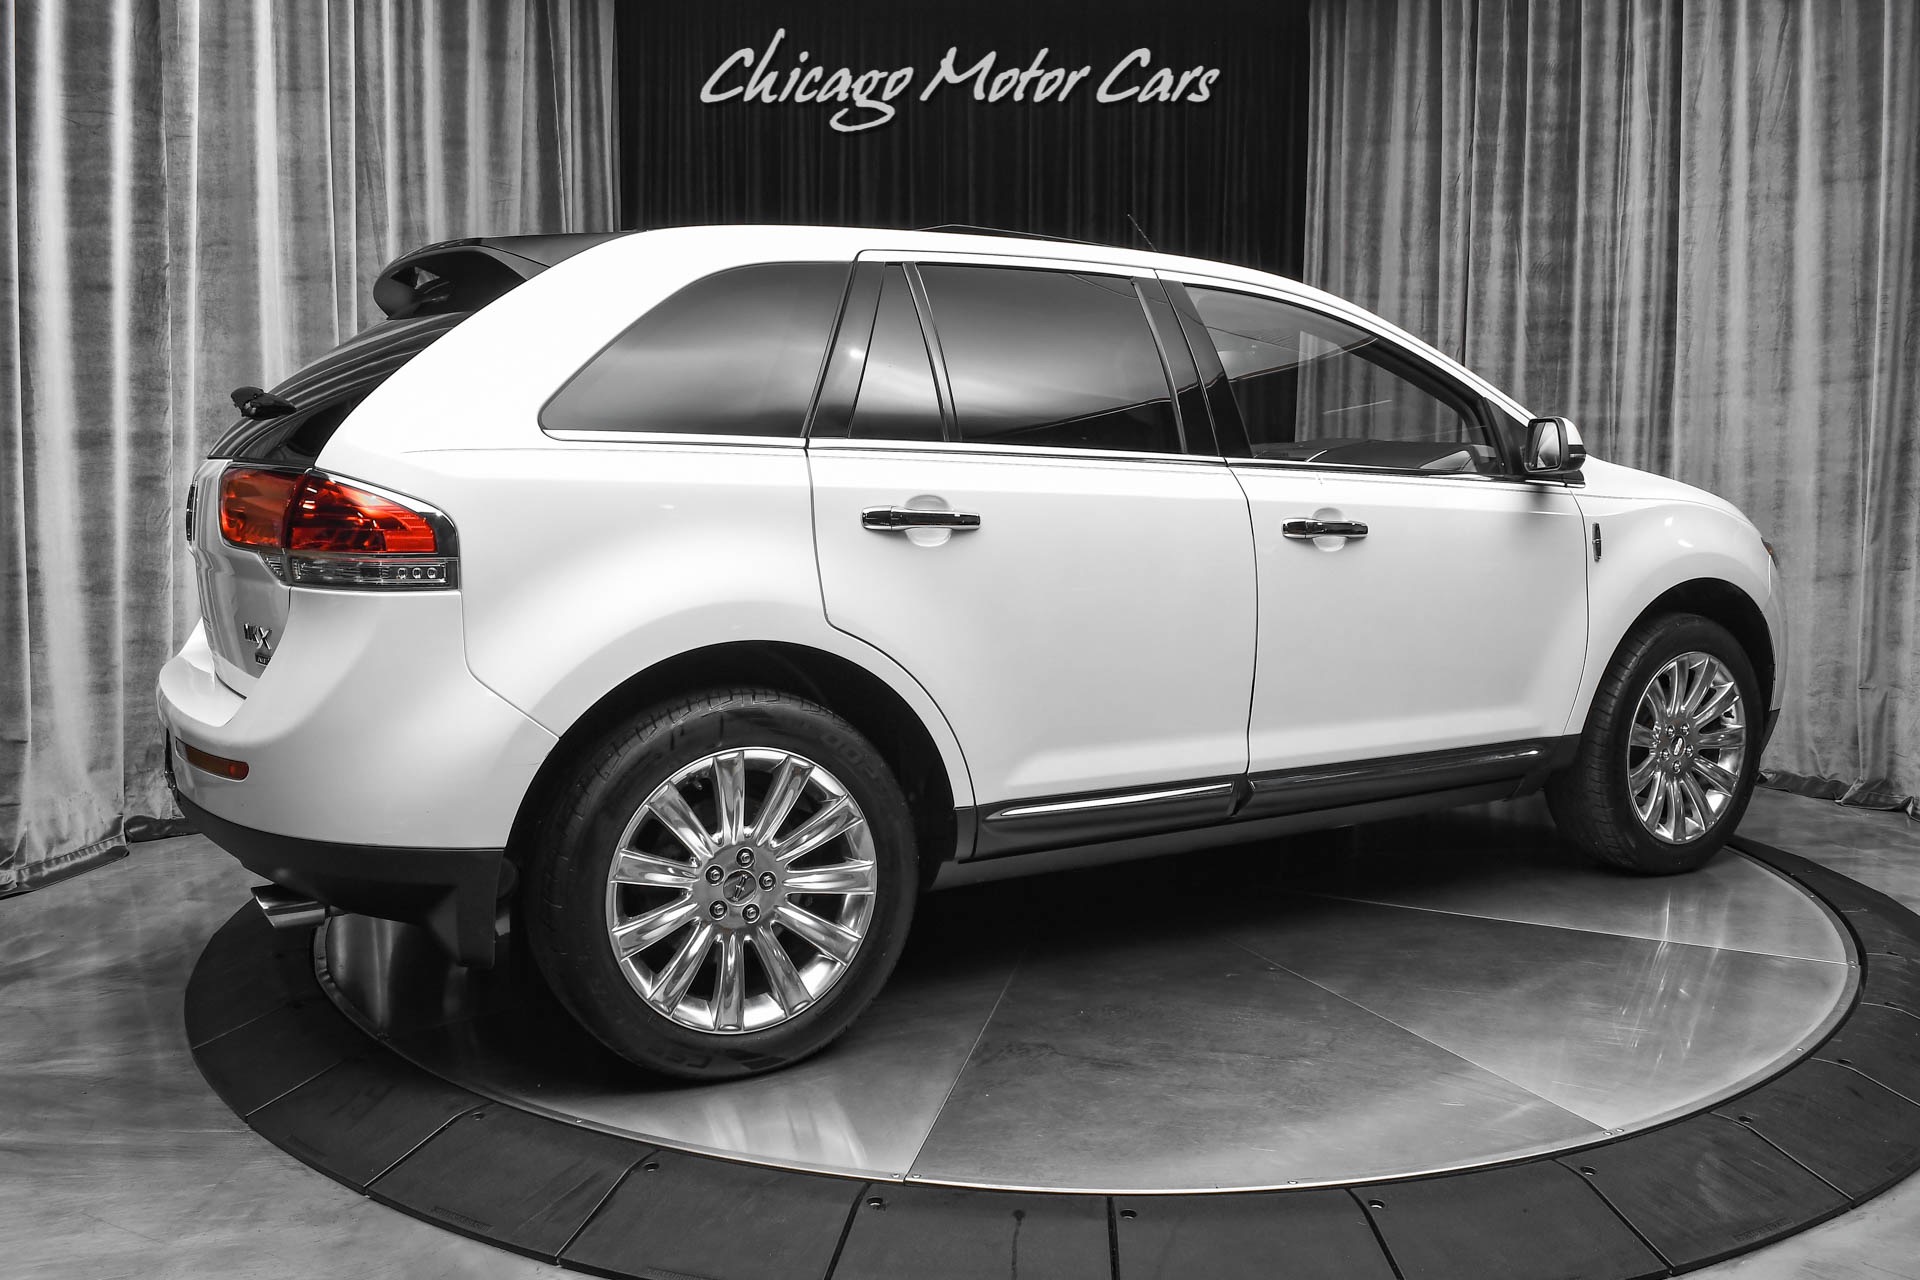 Used-2013-Lincoln-MKX-AWD-SUV-Platinum-White-Tri-Coat-Premium-Pack-Elite-Pack-Highly-Equipped